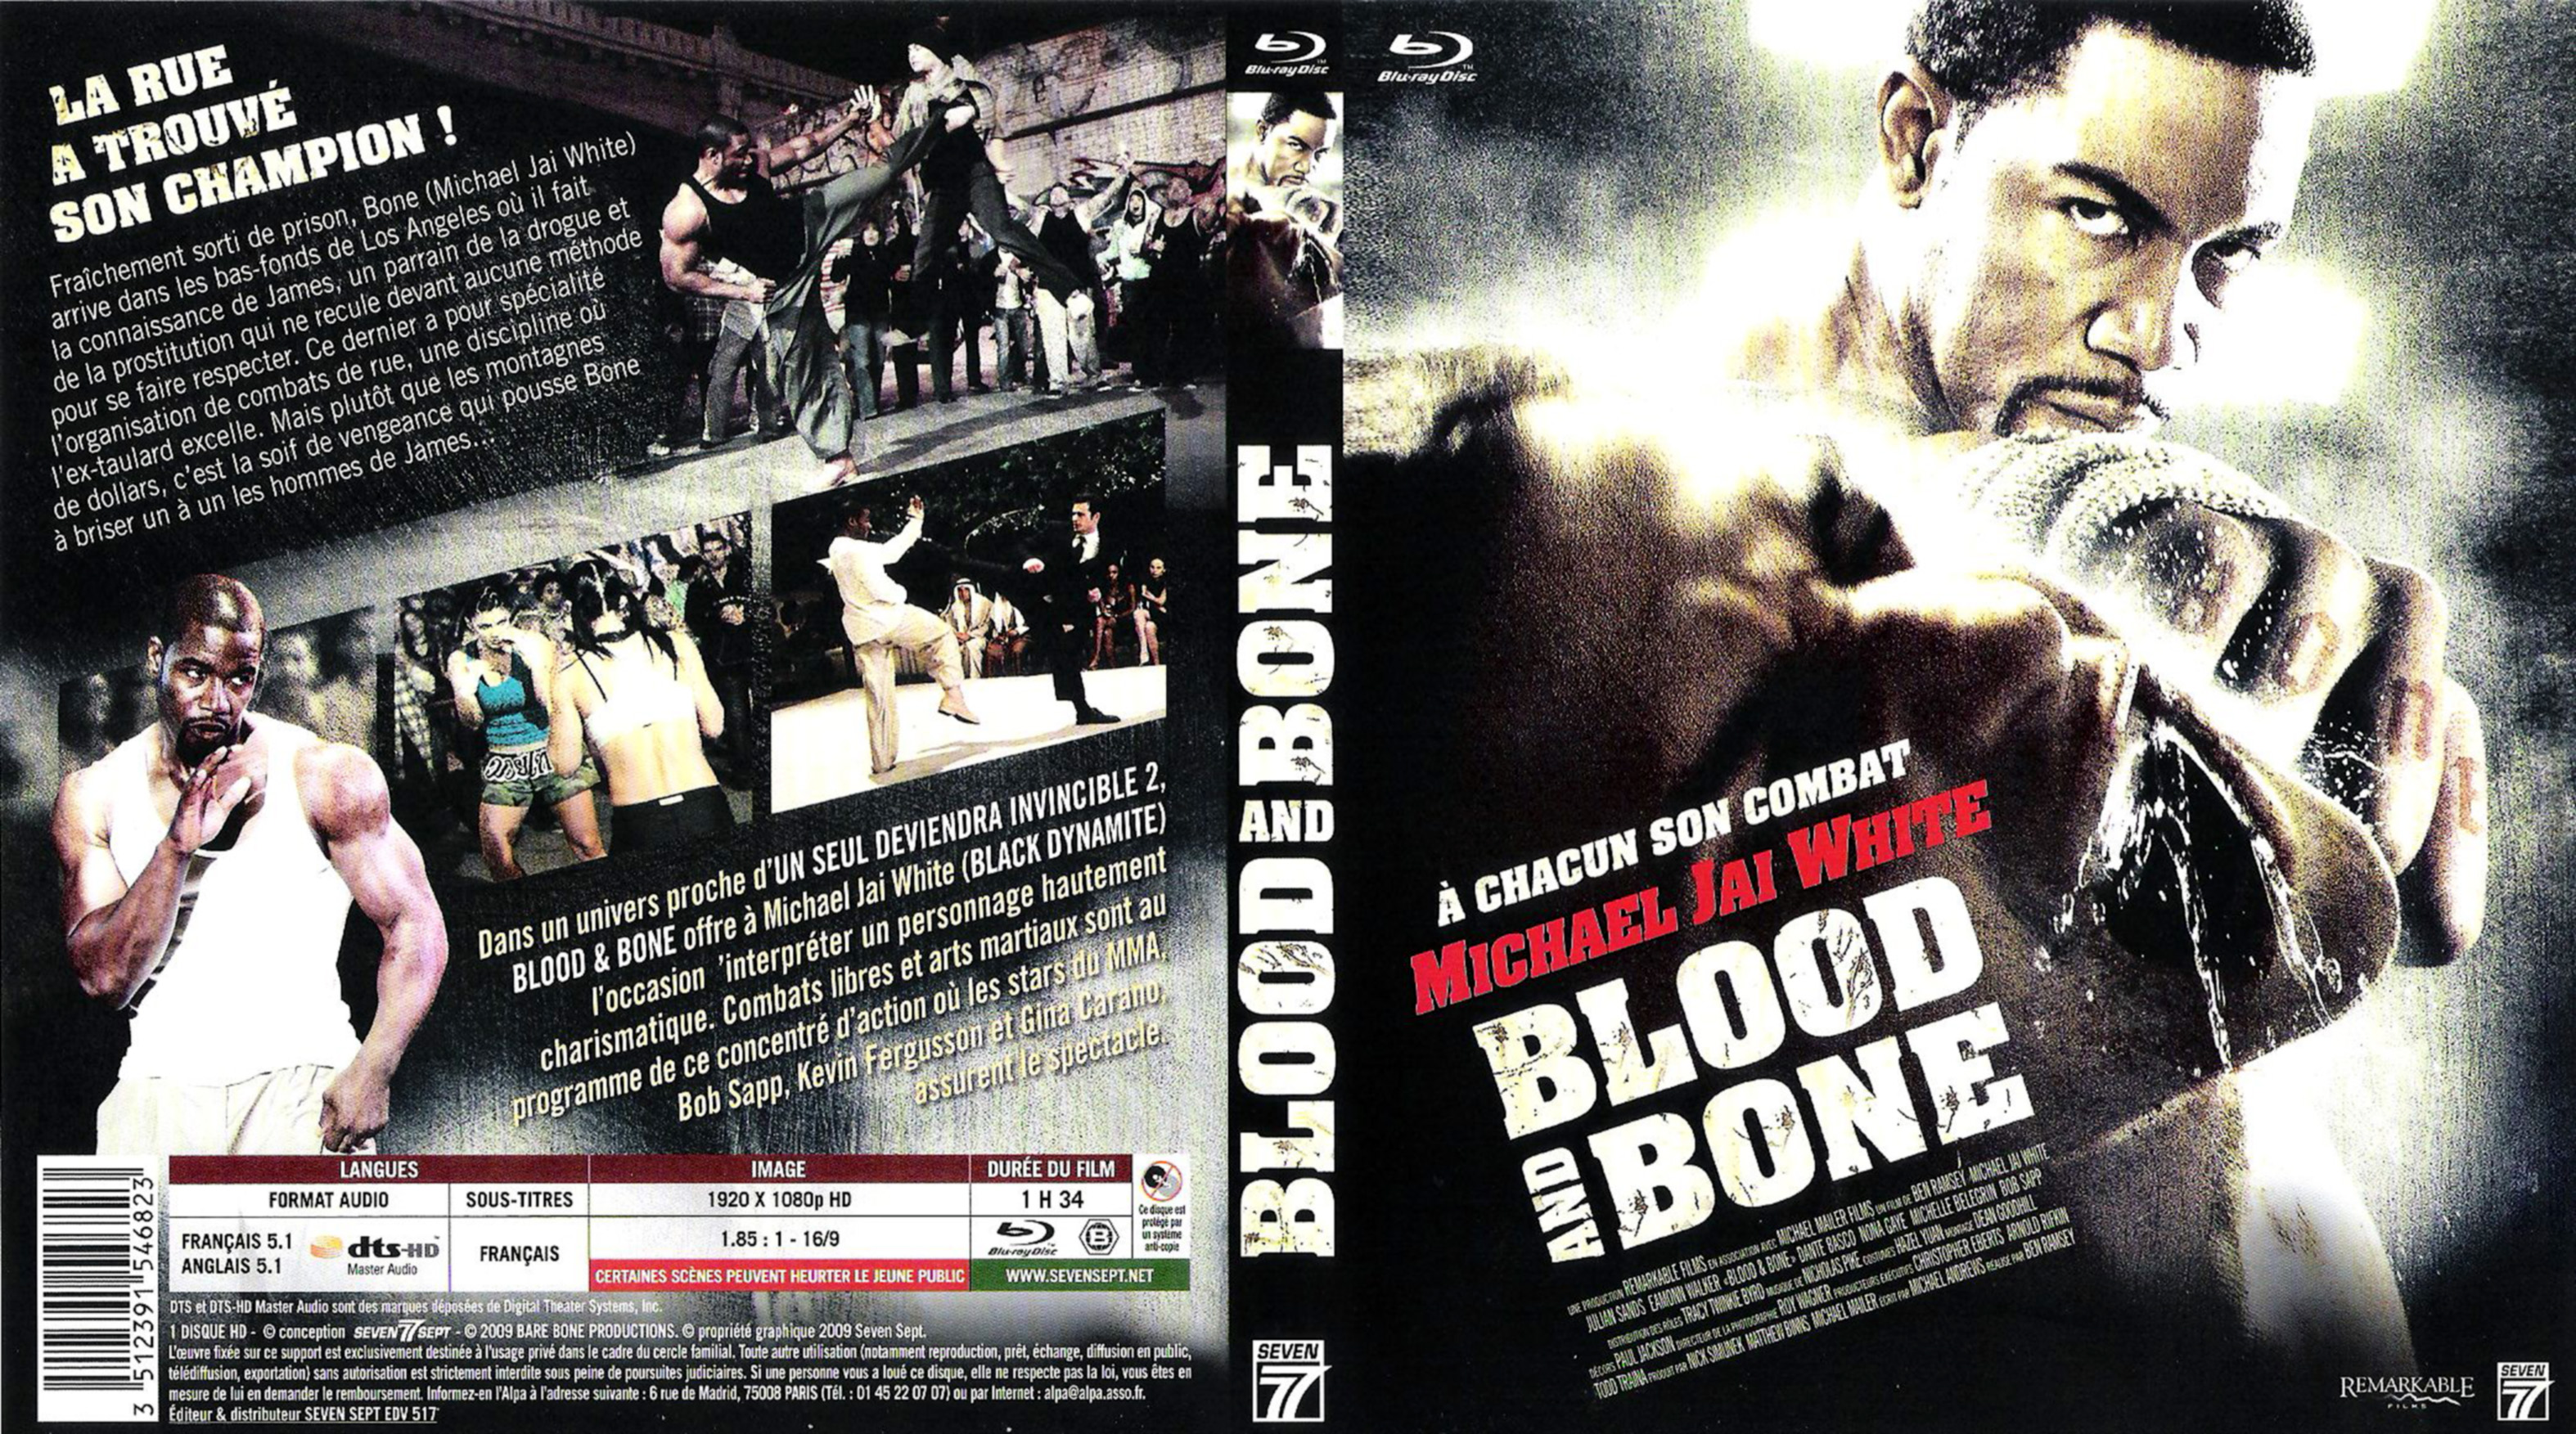 Jaquette DVD Blood and bone (BLU-RAY)